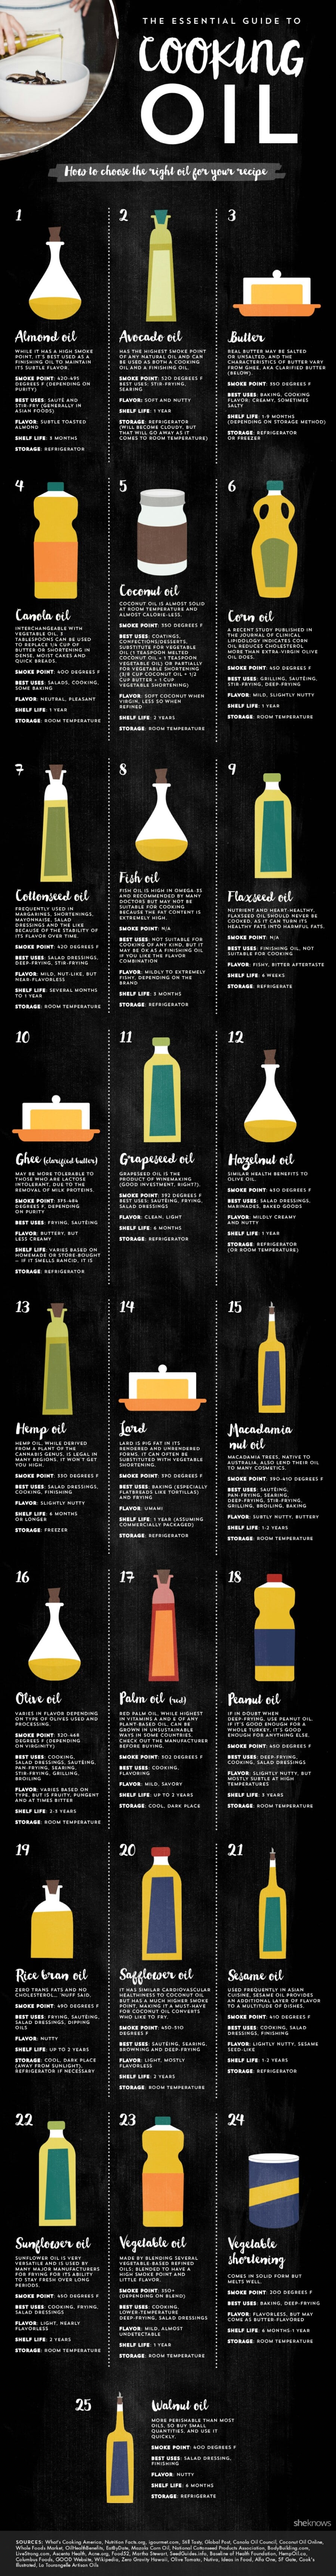 Here is a more detailed guide to cooking oils.